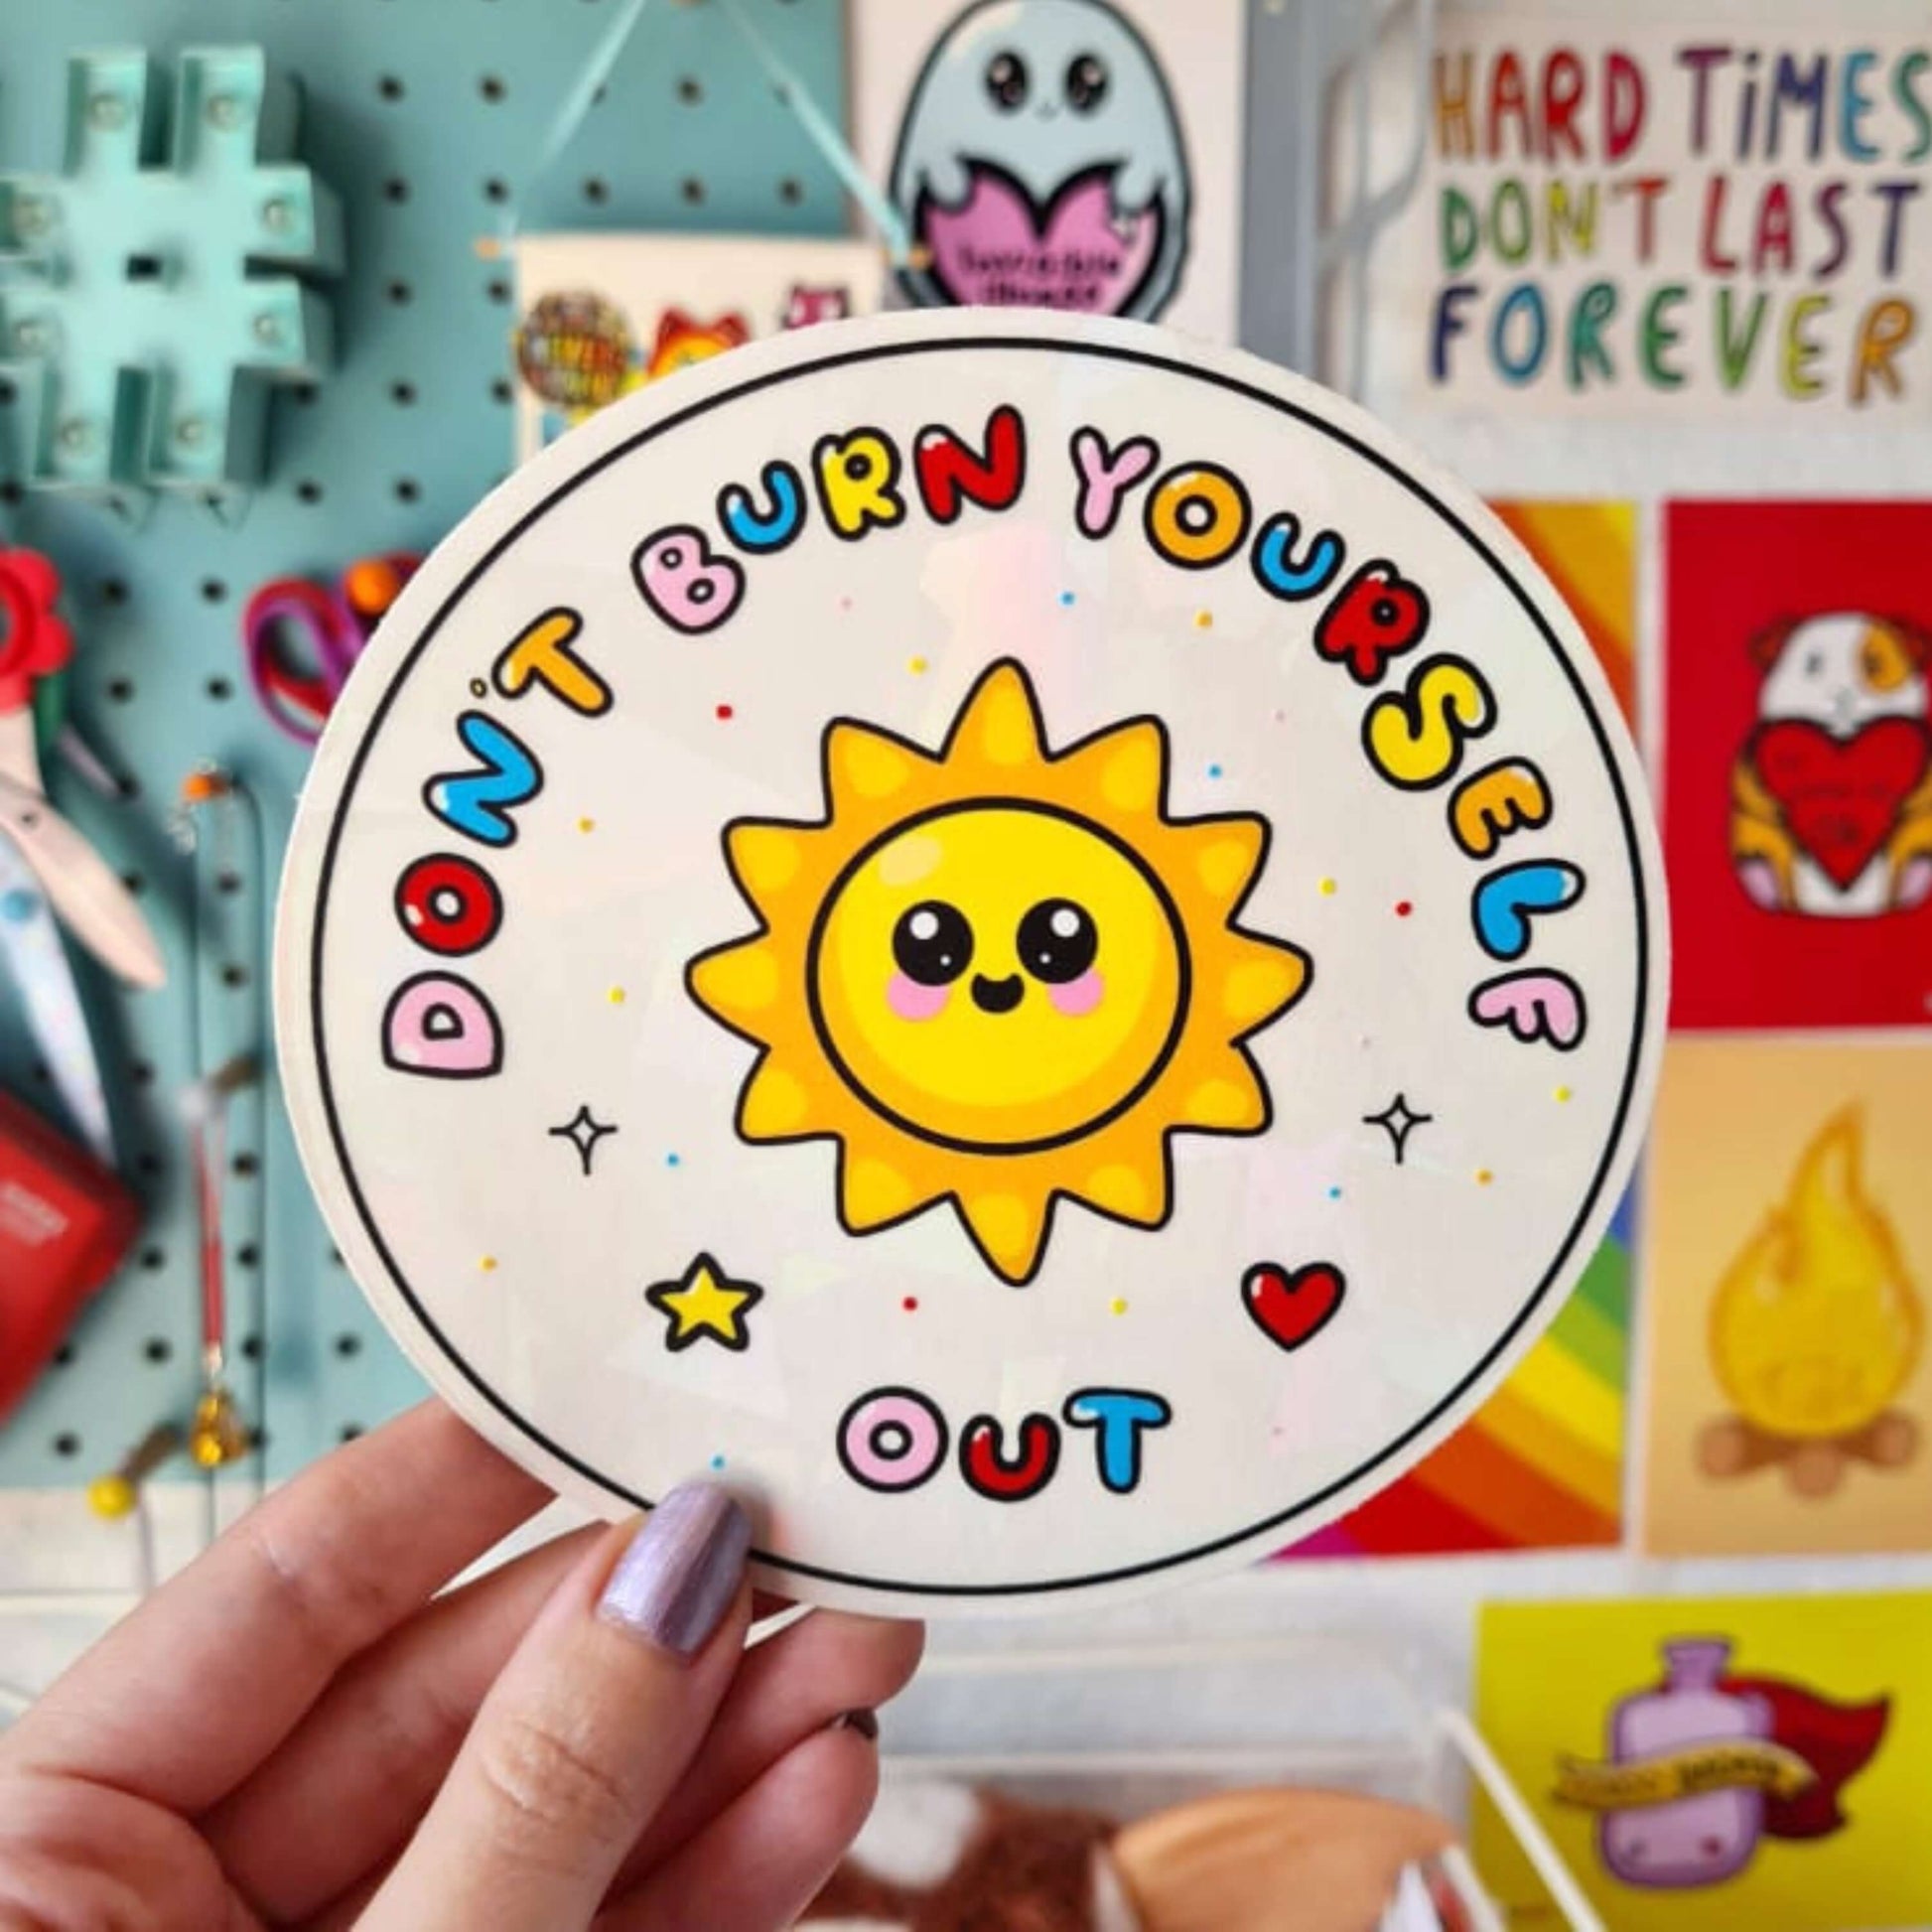 The Don't Burn Yourself Out Sun Catcher Rainbow Window Sticker being held up in front of a blue pinboard with other innabox products. The circle holographic sticker features a smiling sunshine with pink blush in the middle with rainbow bubble writing reading 'don't burn yourself out' with a yellow star, red heart, black sparkle outlines and rainbow dots all over. The design is inspired by self care.